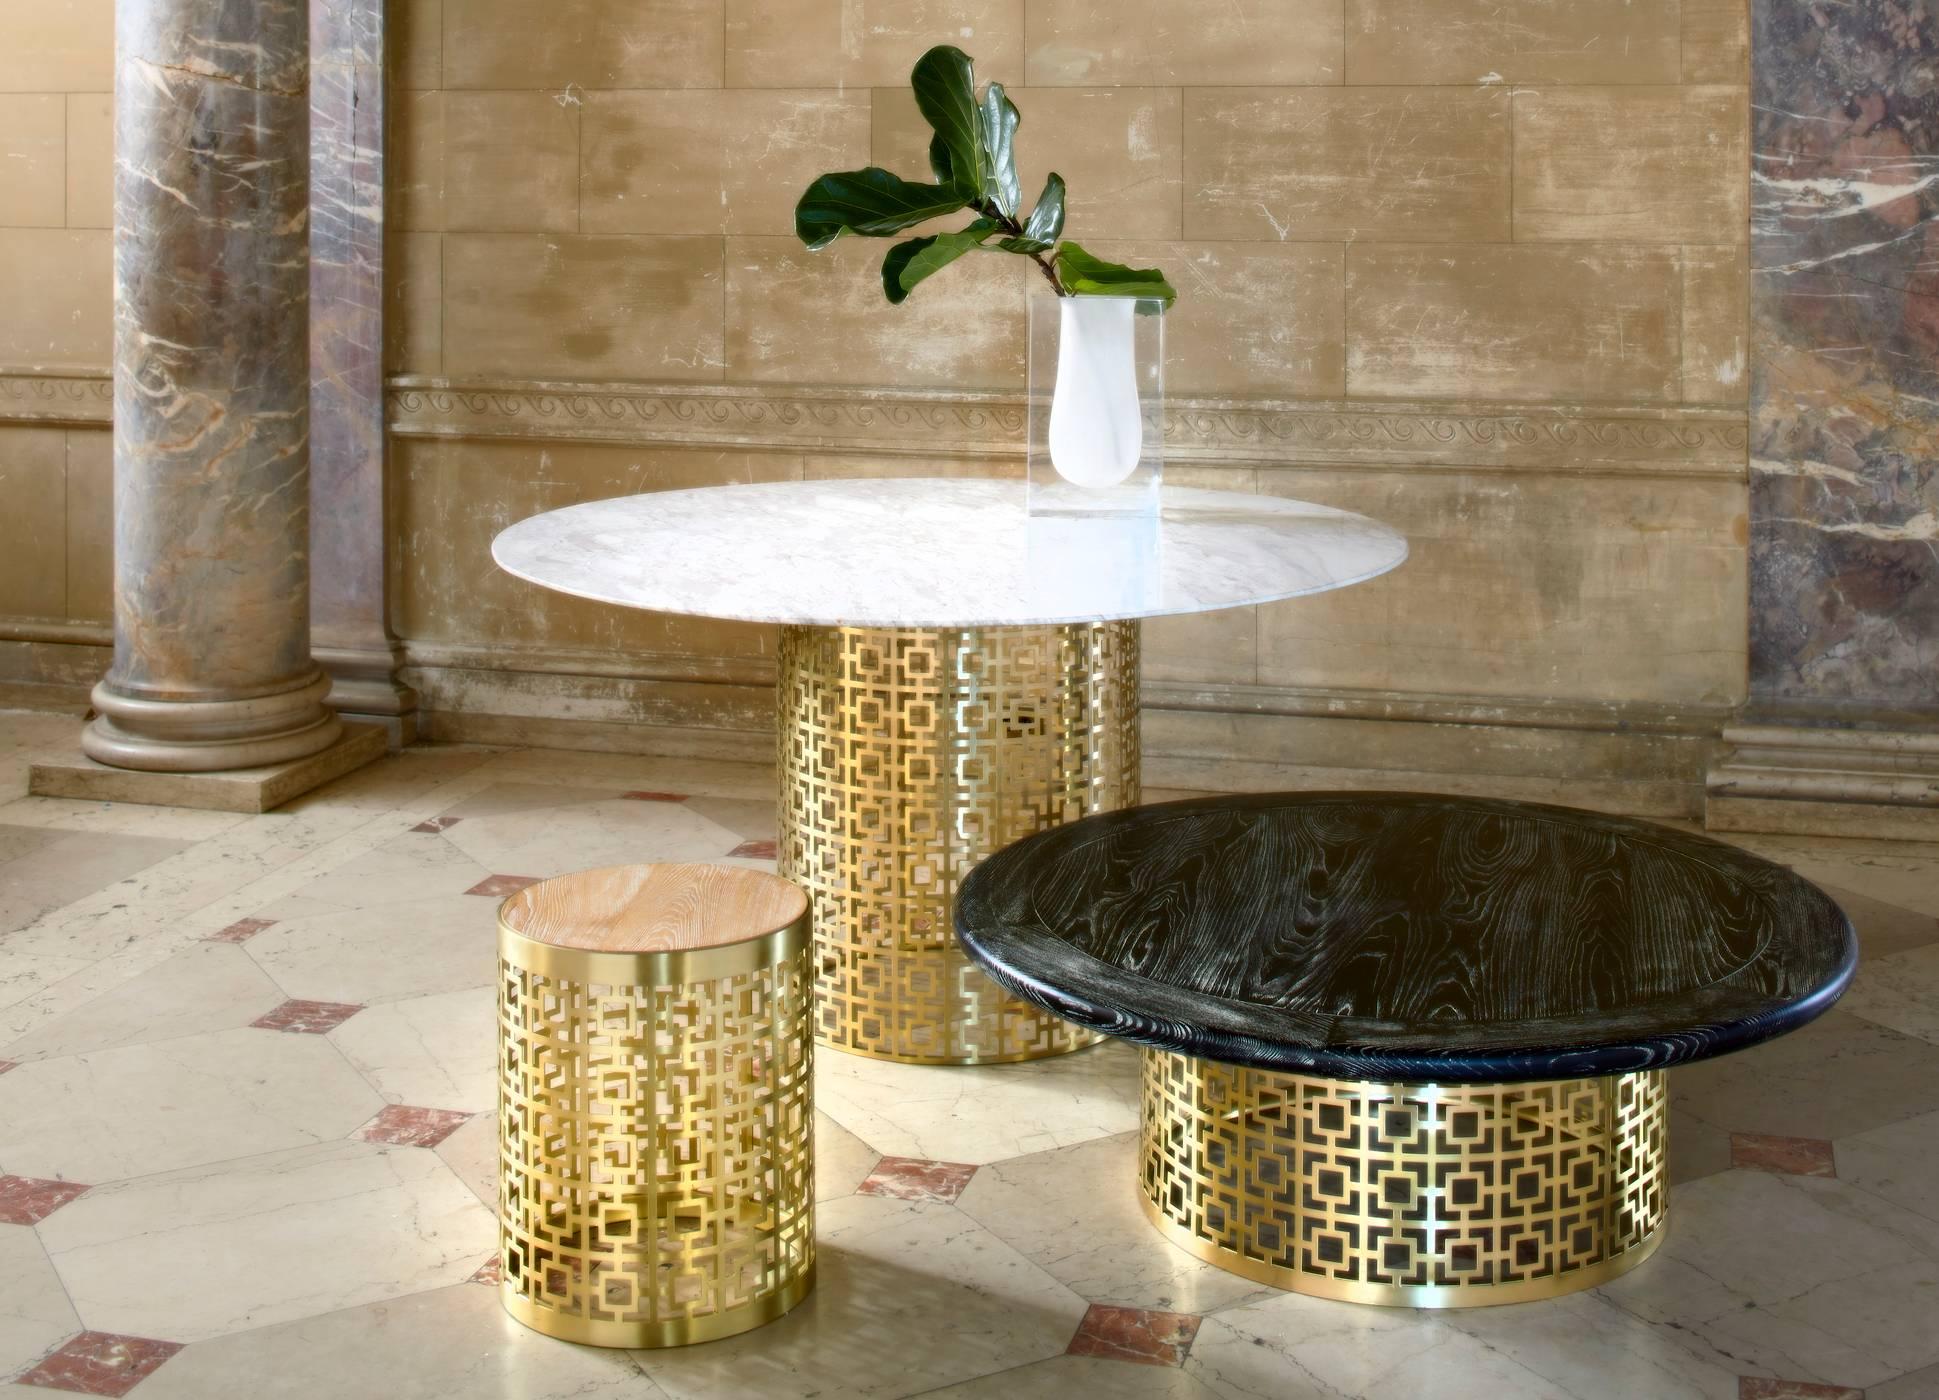 Graphic Glamour. Our signature Nixon pattern rendered in perforated brushed brass provides a sophisticated perch for a solid black marble tabletop. Contact Dealer for additional finish options.

Specs:
Marble Top: 44 in. Dia x 1.75 in. H
Base: 26